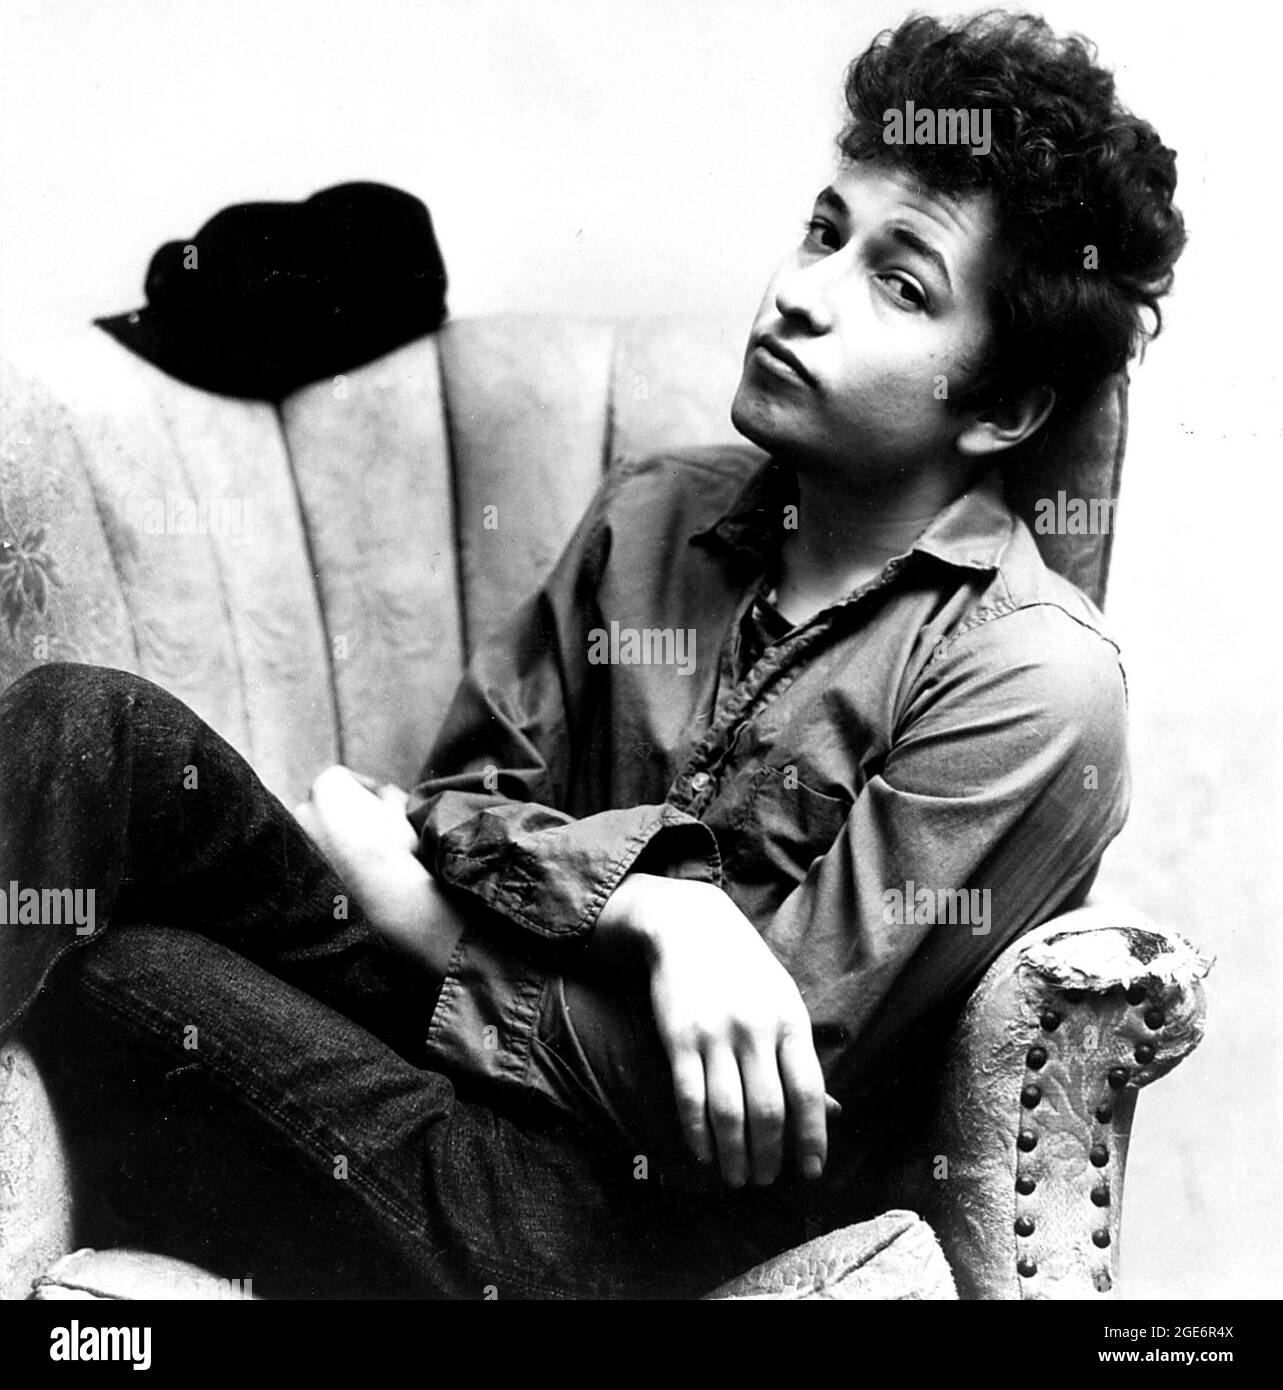 August 17, 2021: A lawsuit filed in New York City claims that legendary singer-songwriter BOB DYLAN sexually abused a 12-year-old girl in 1965, according to court documents. The now-68-year-old woman, identified in the lawsuit as J.C., alleges that ''over a six-week period'' the singer ''befriended and established an emotional connection'' with her and ultimately sexually abused her multiple times between April and May of 1965 when she was 12. FILE IMAGE SHOT ON: Circa 1965, Los Angeles, California, USA: Singer BOB DYLAN relaxing on an old arm chair during a portrait session. (Credit Image: © Stock Photo